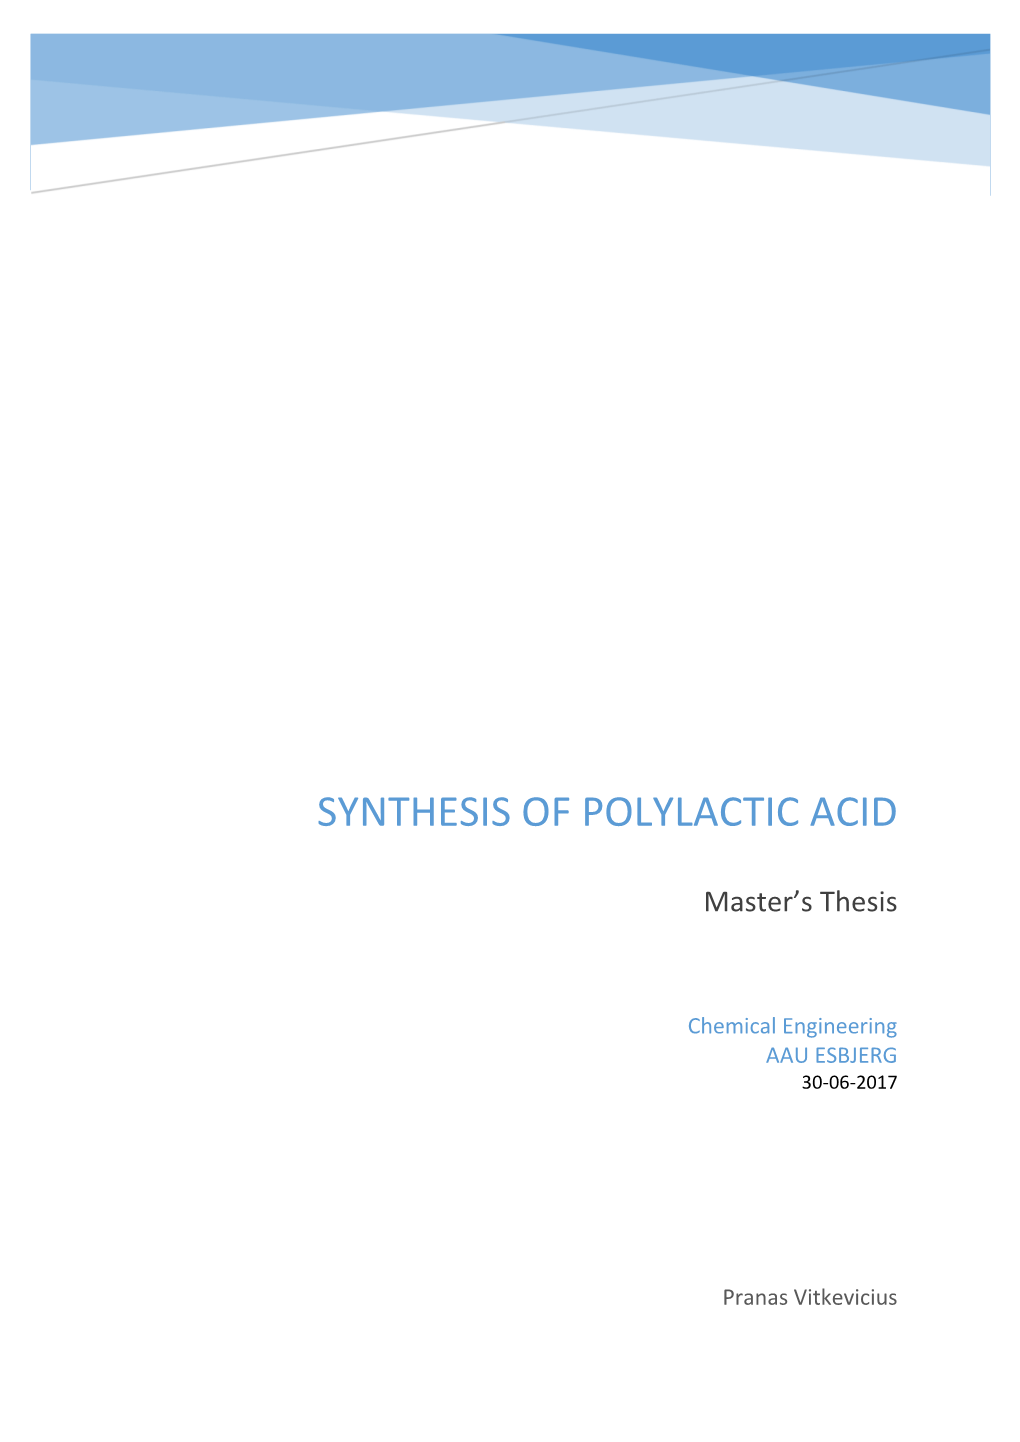 Synthesis of Polylactic Acid